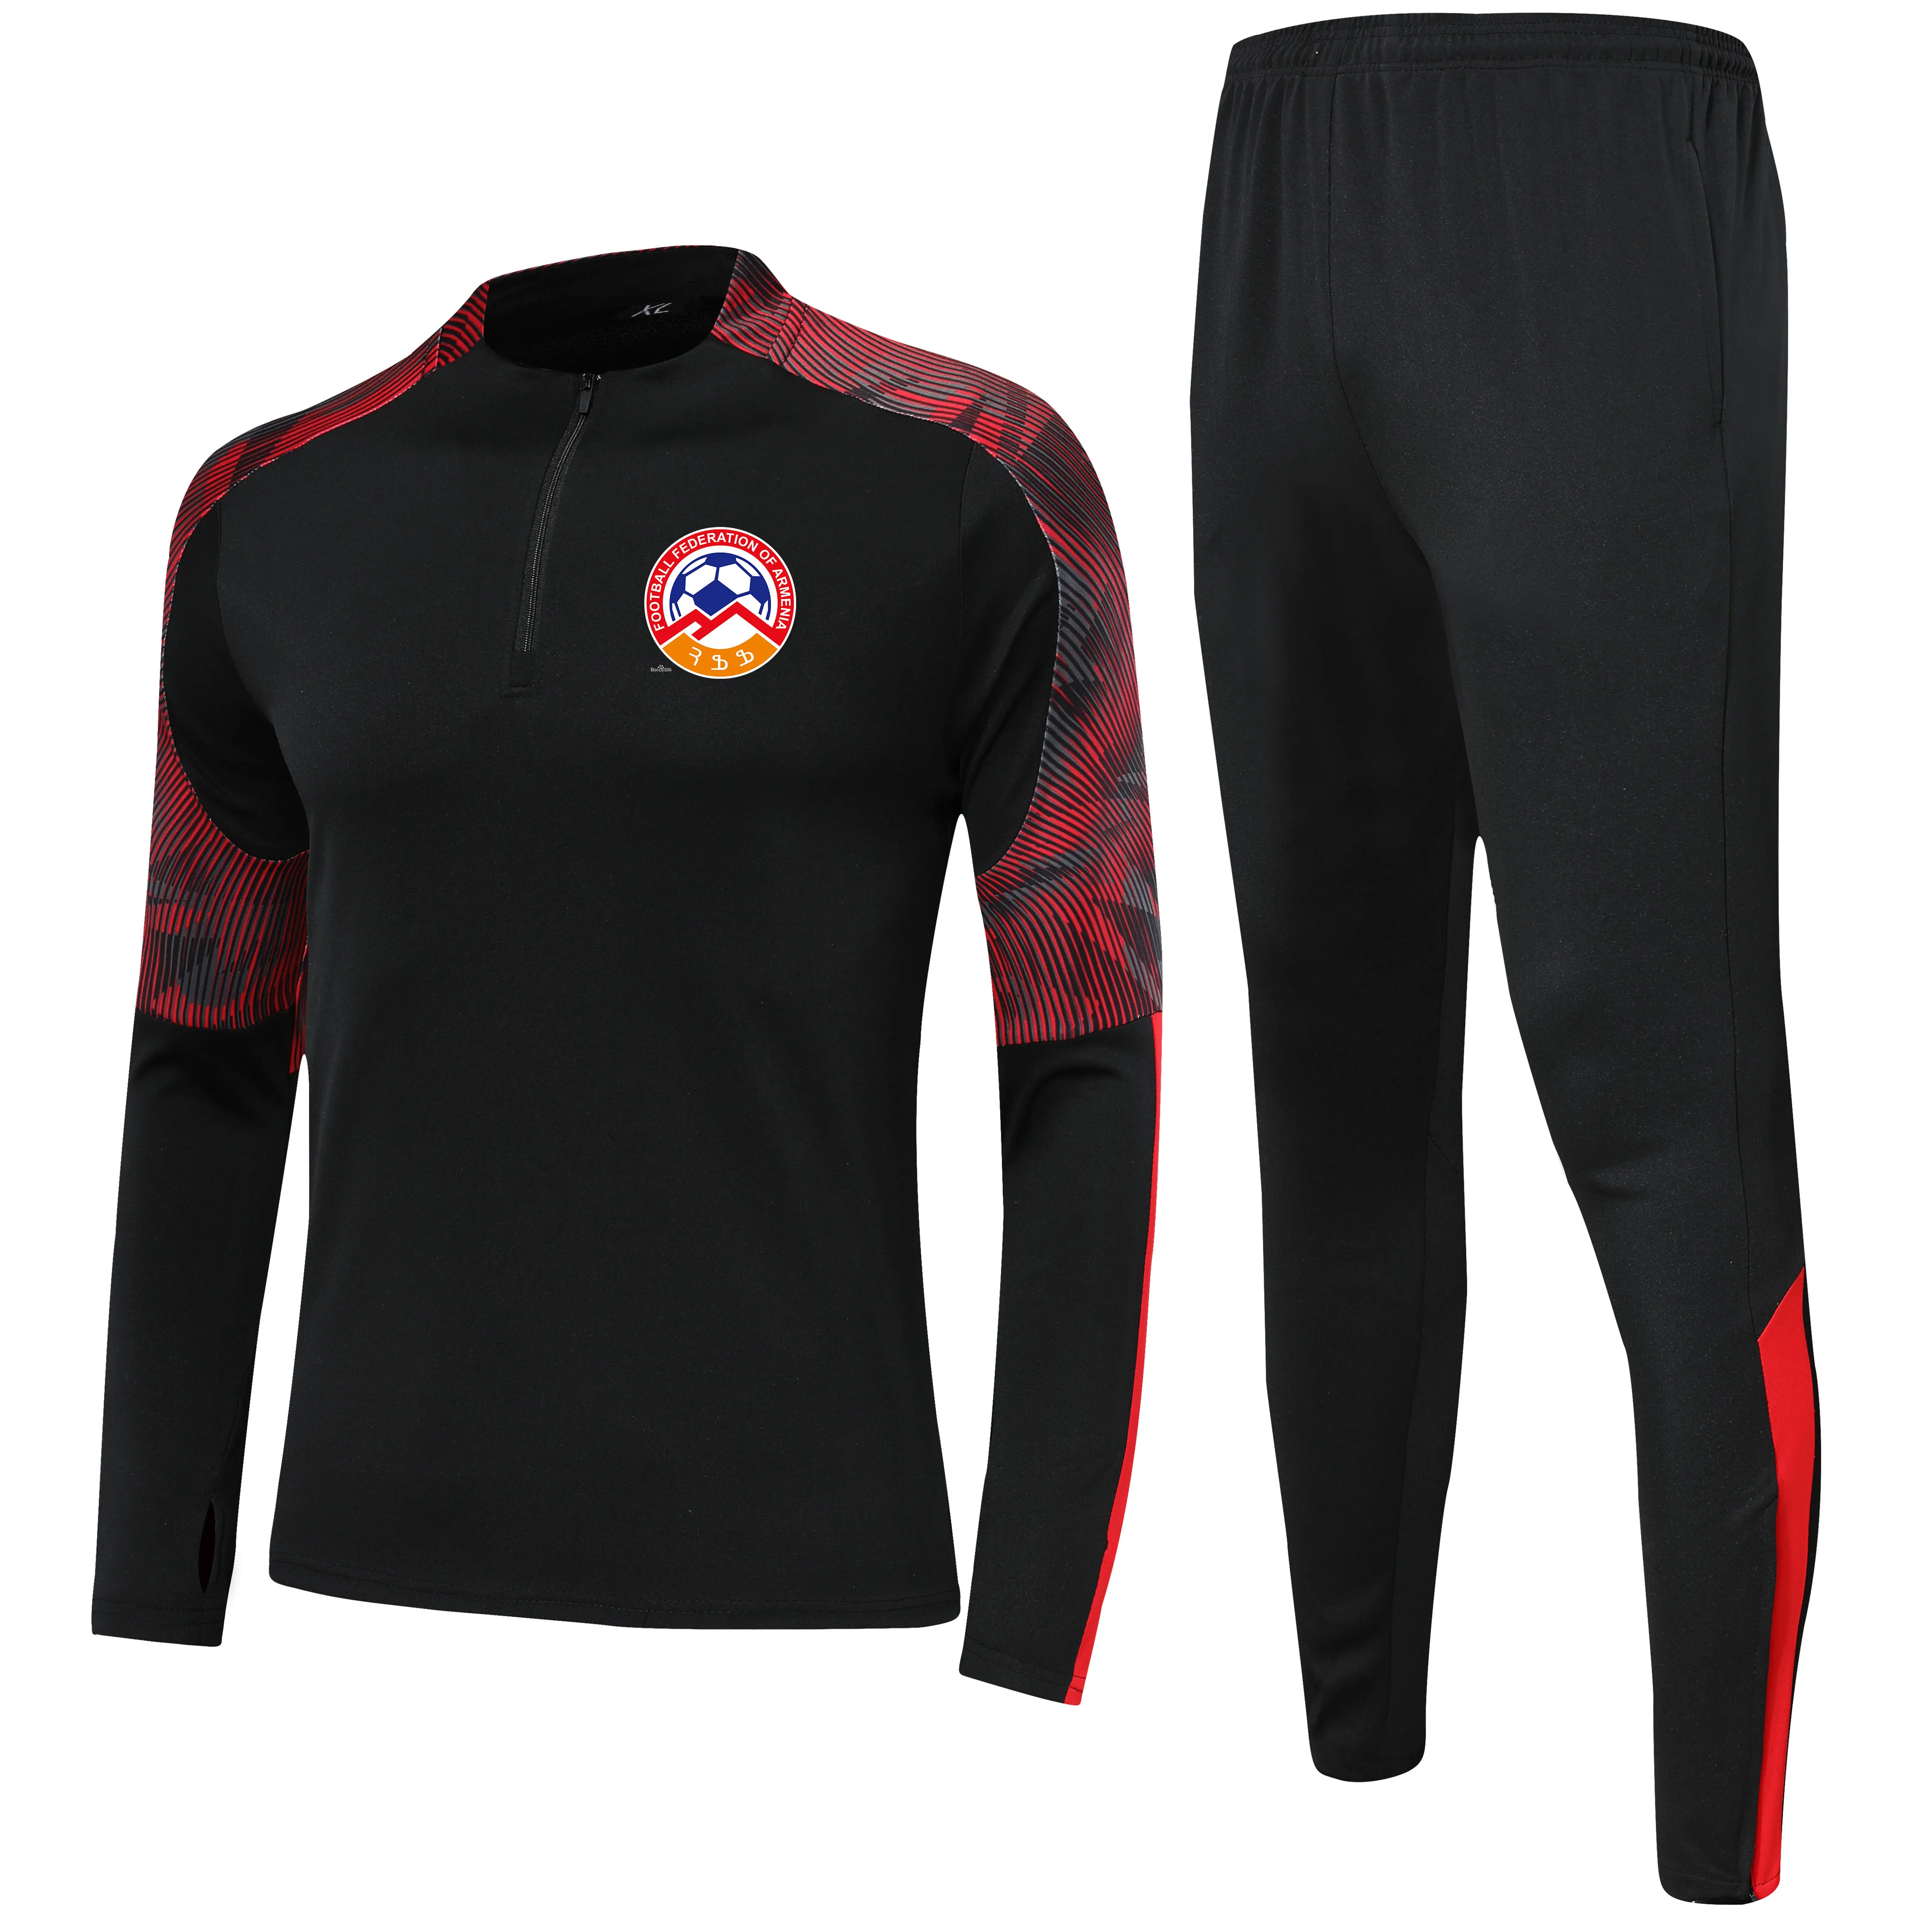 Armenia national football team Kids Size 4XS to 2Xl Running Tracksuits Sets Men Outdoor Suits Home Kits Jackets Pant Sportswear Hi233a